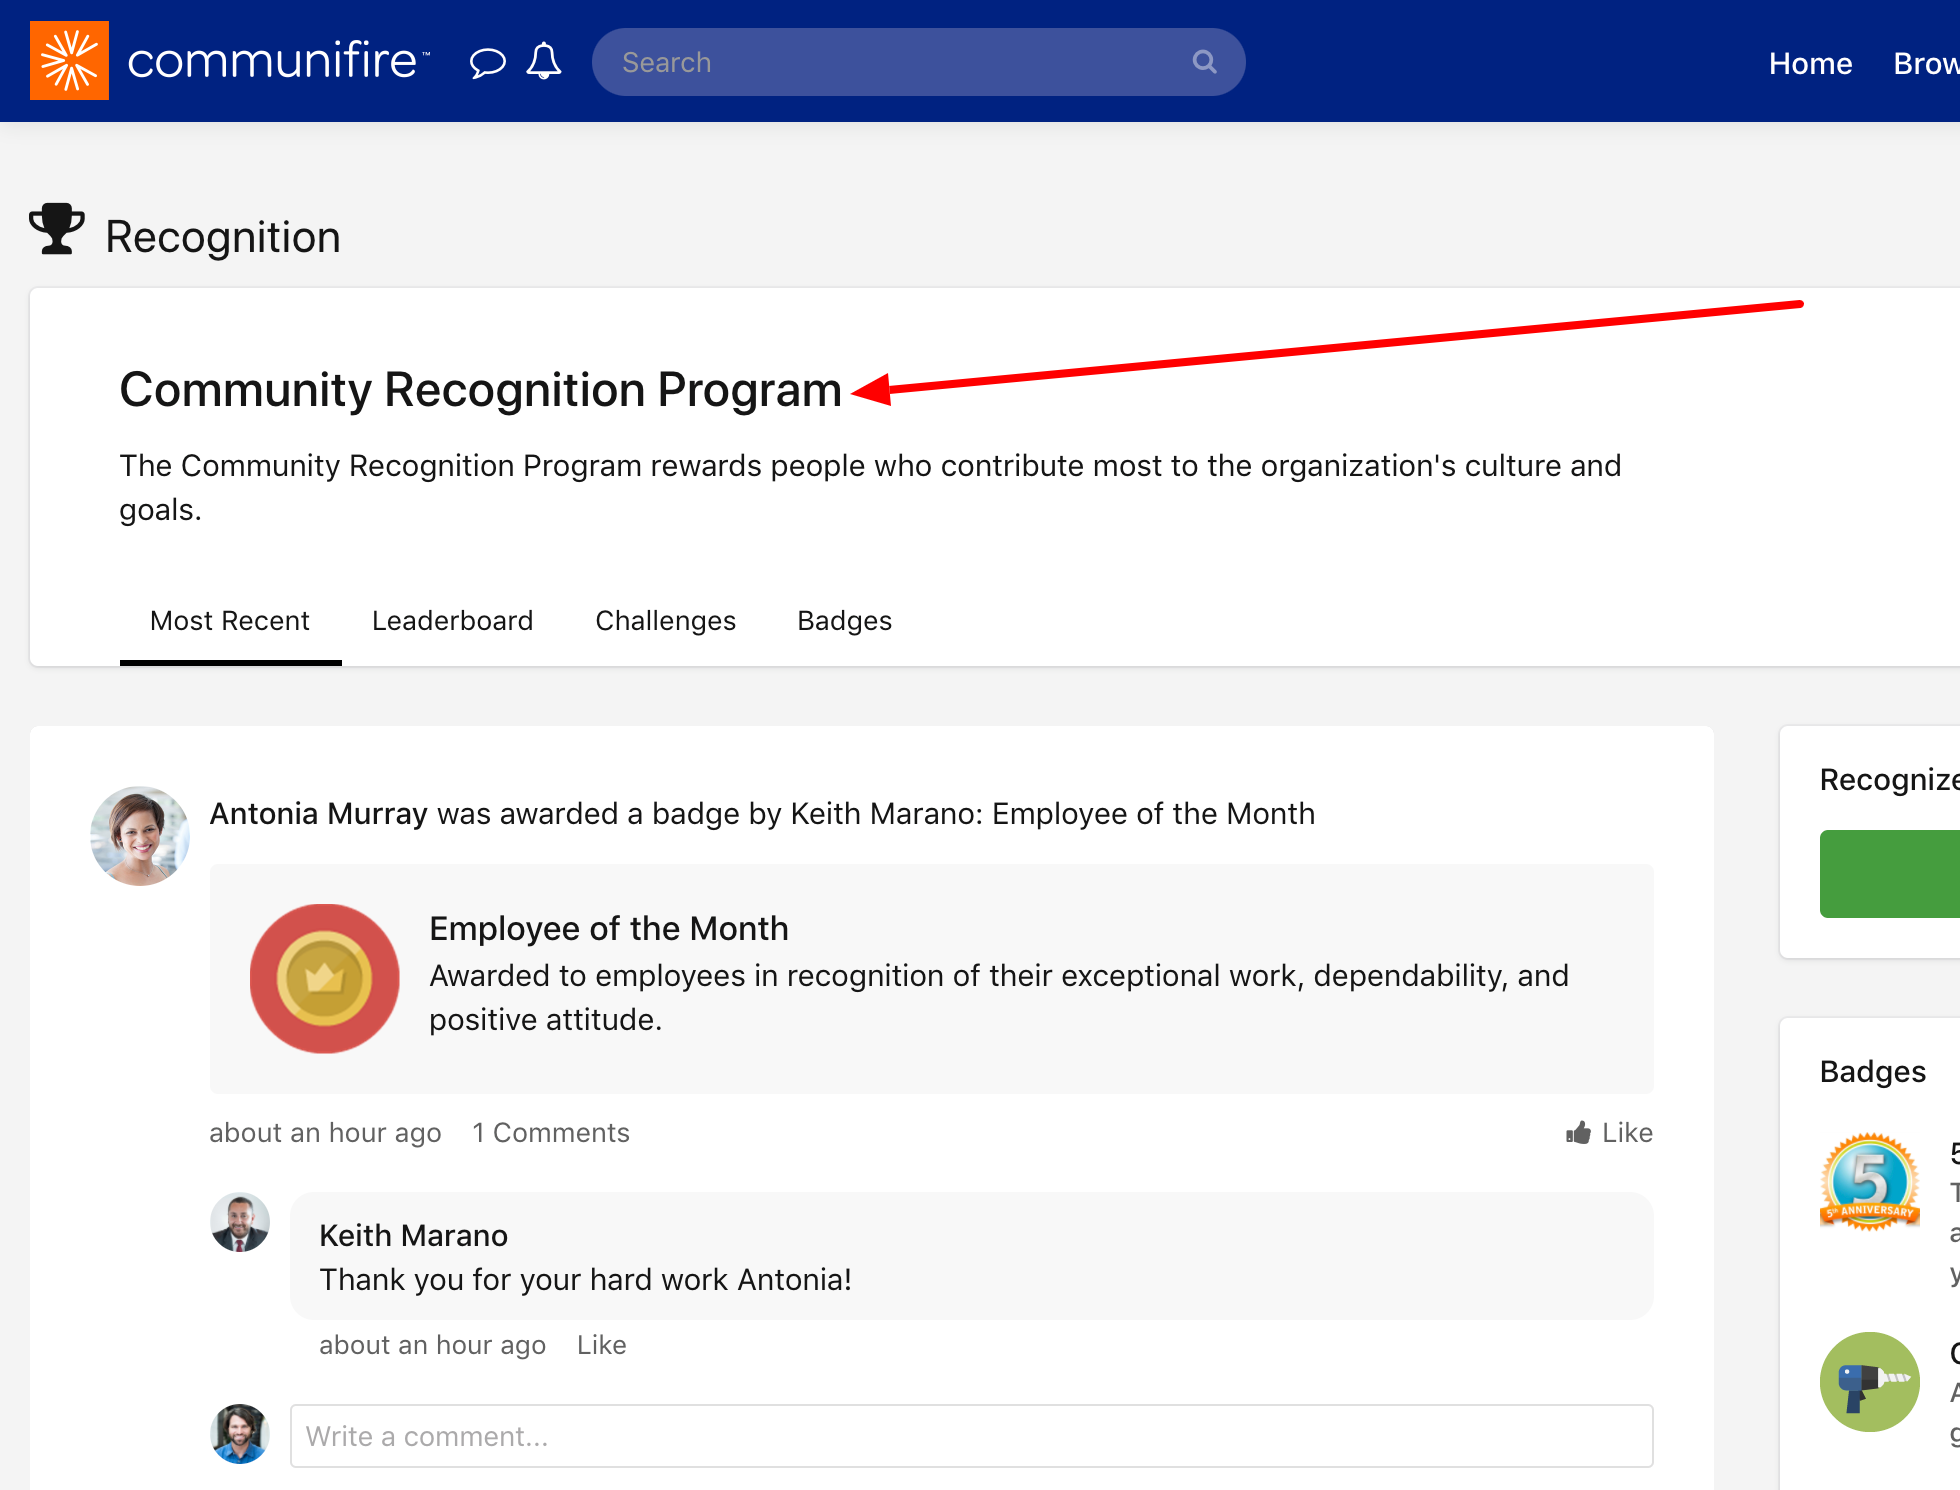 Select the recognition program